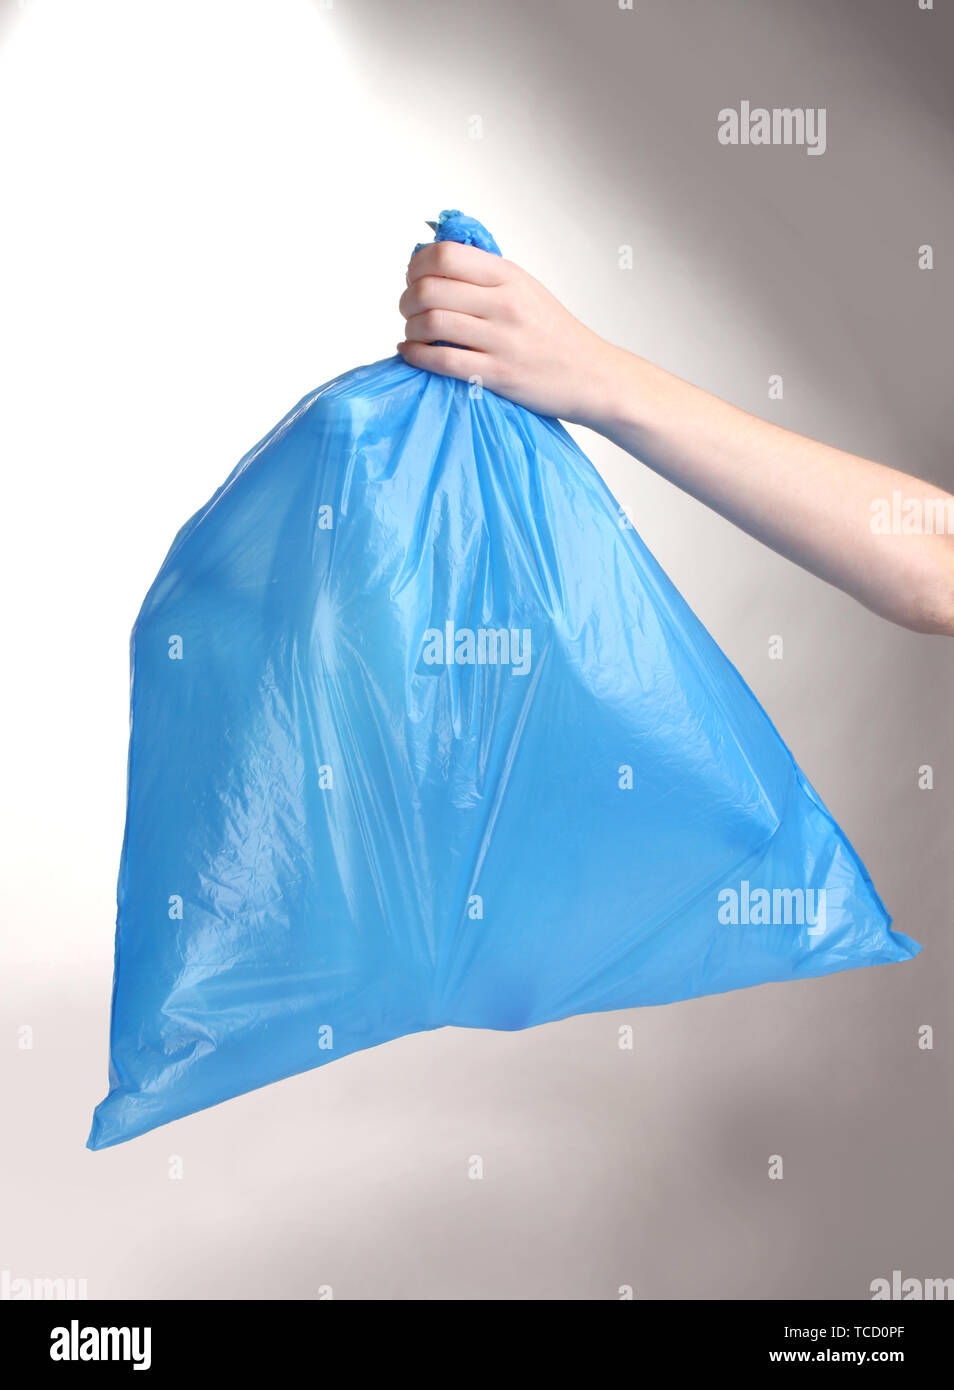 Green and Black Garbage Bags Stock Photo - Image of liner, household:  80226858